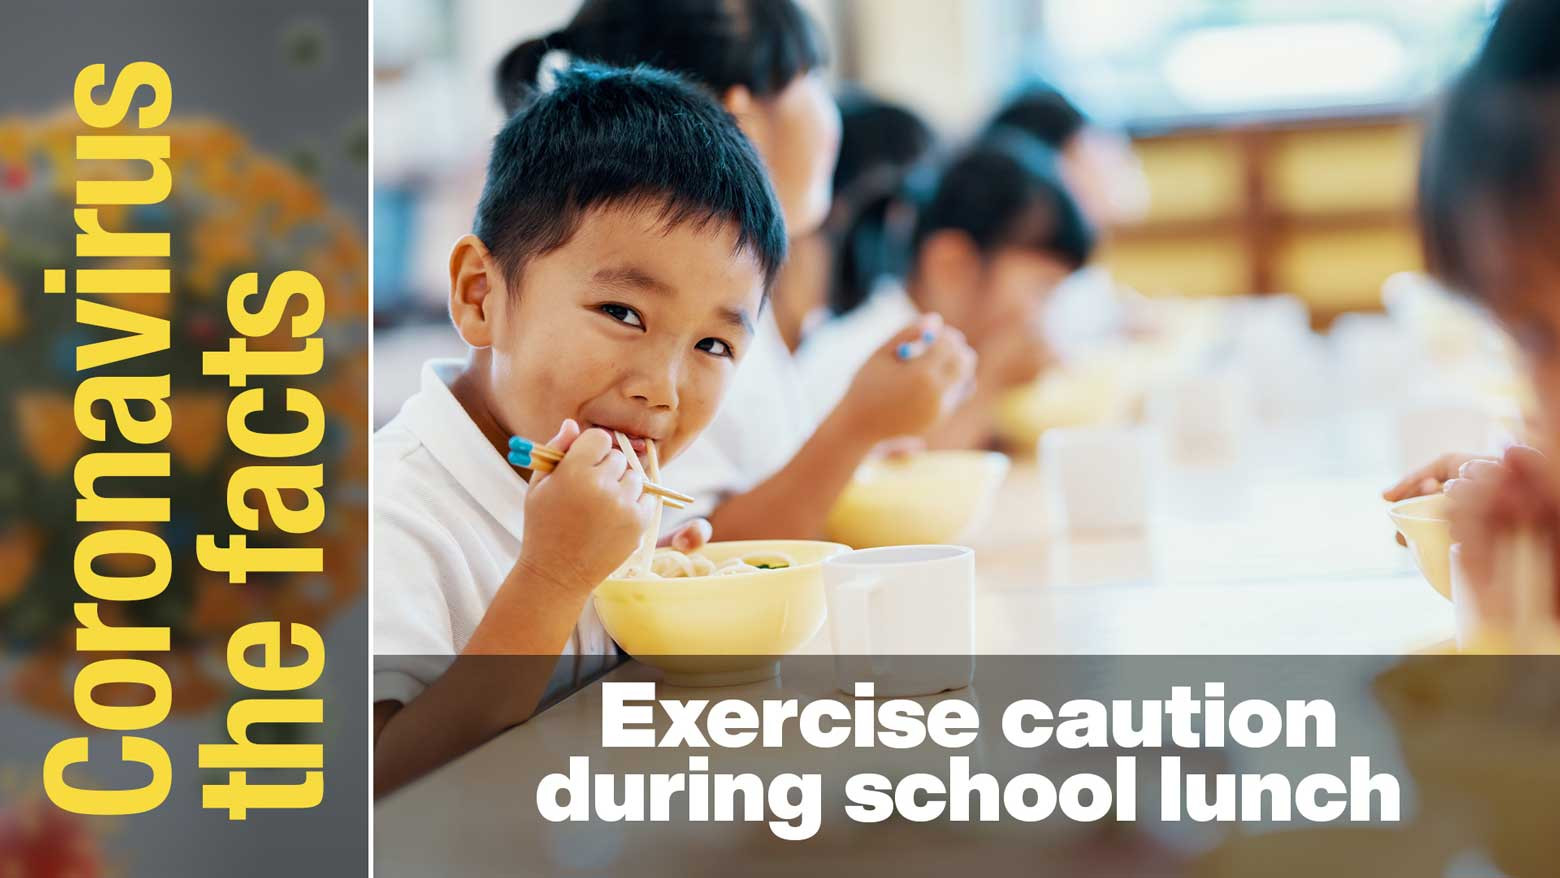 What are the important points when children have school lunch?